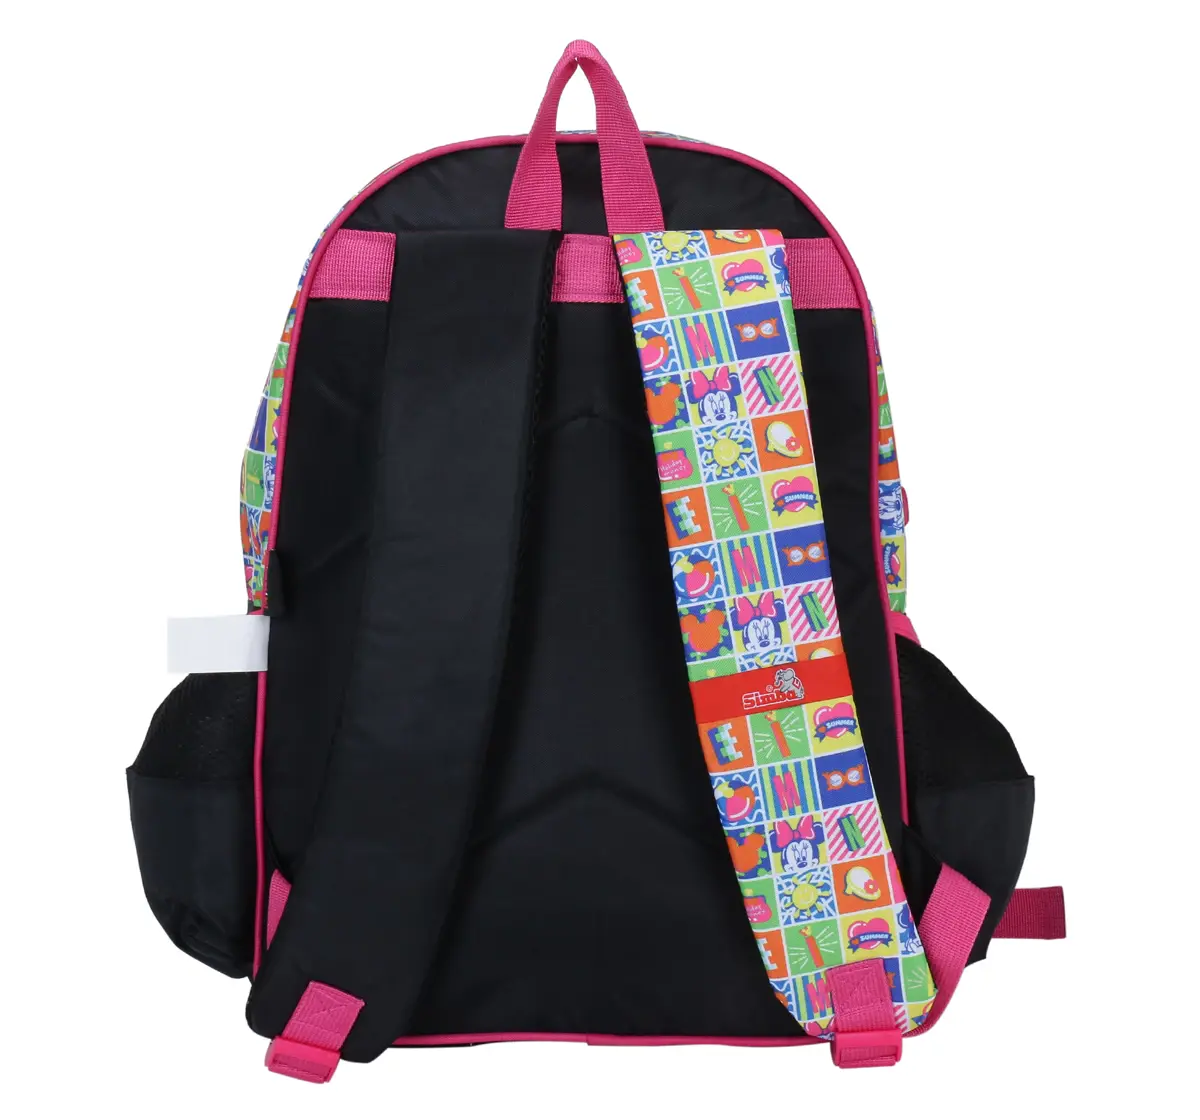 Simba Minnie Proud To Be Me 16 Backpack Multicolor 3Y+